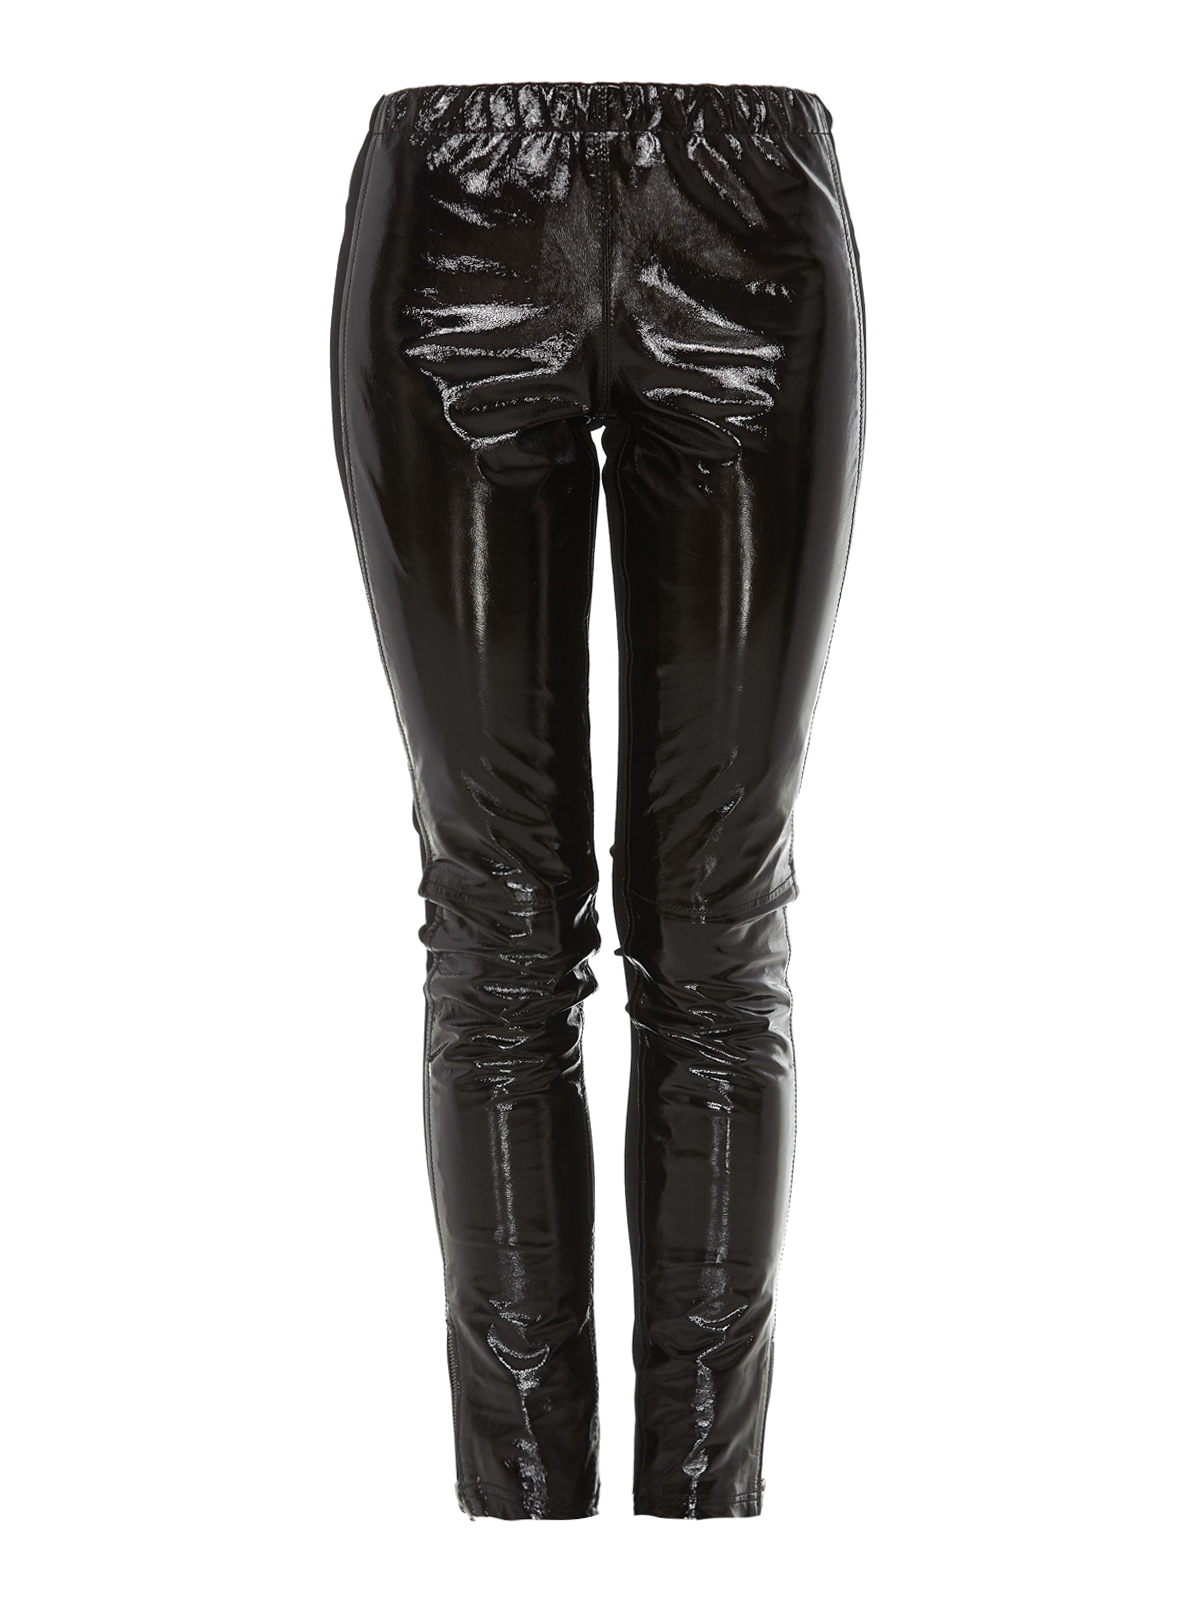 This week I'm wearing… PVC trousers